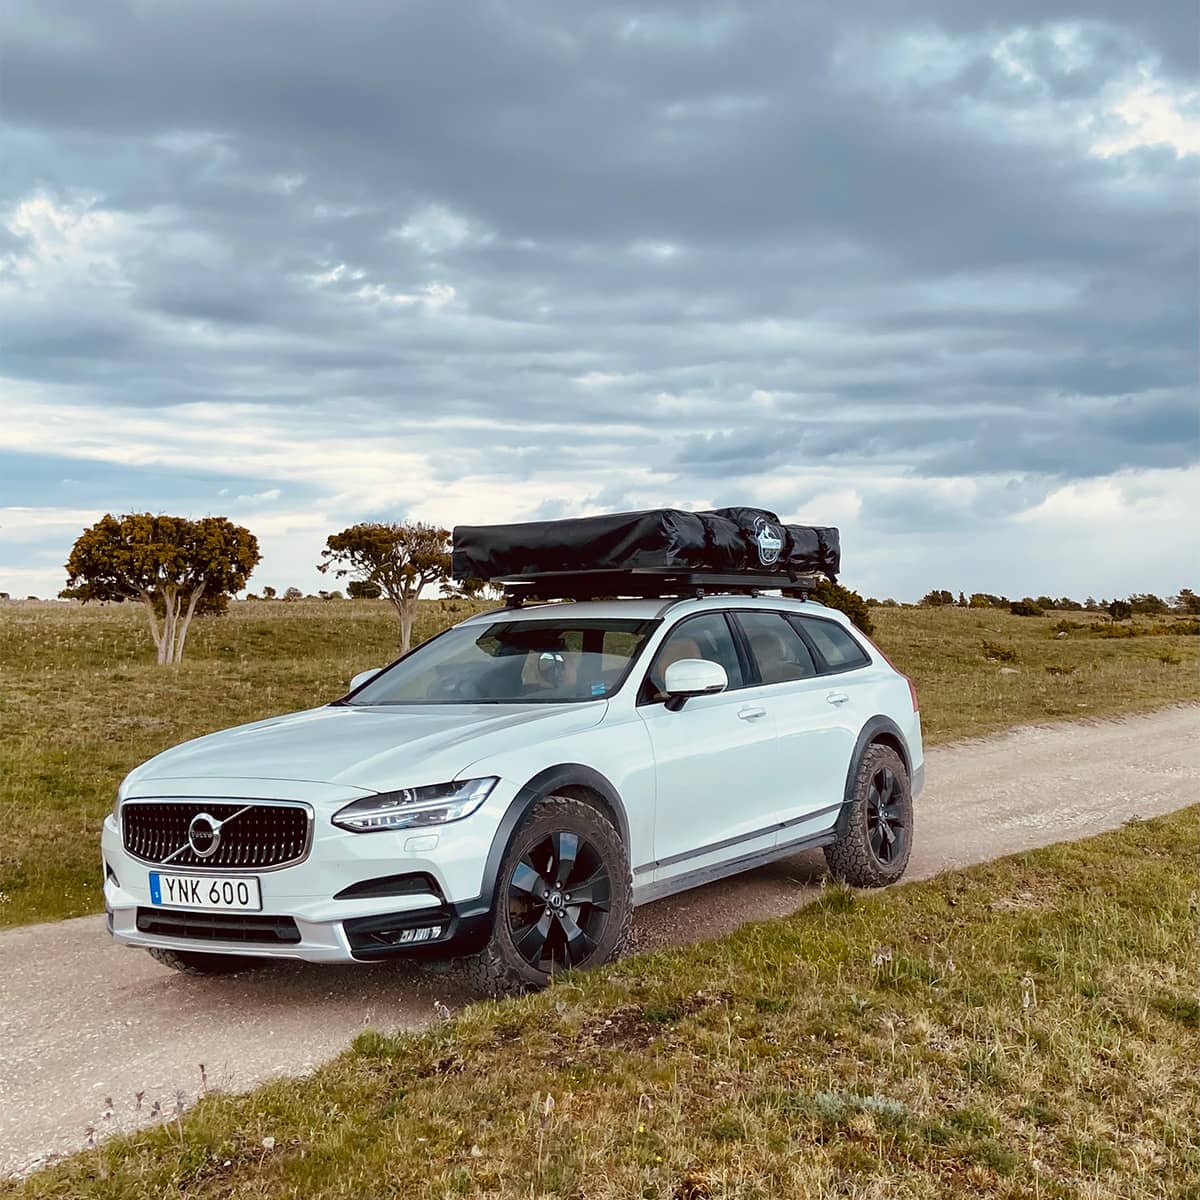 Lifted Volvo V90 Cross COuntry station wagon with off-road modifications and overland roof rack